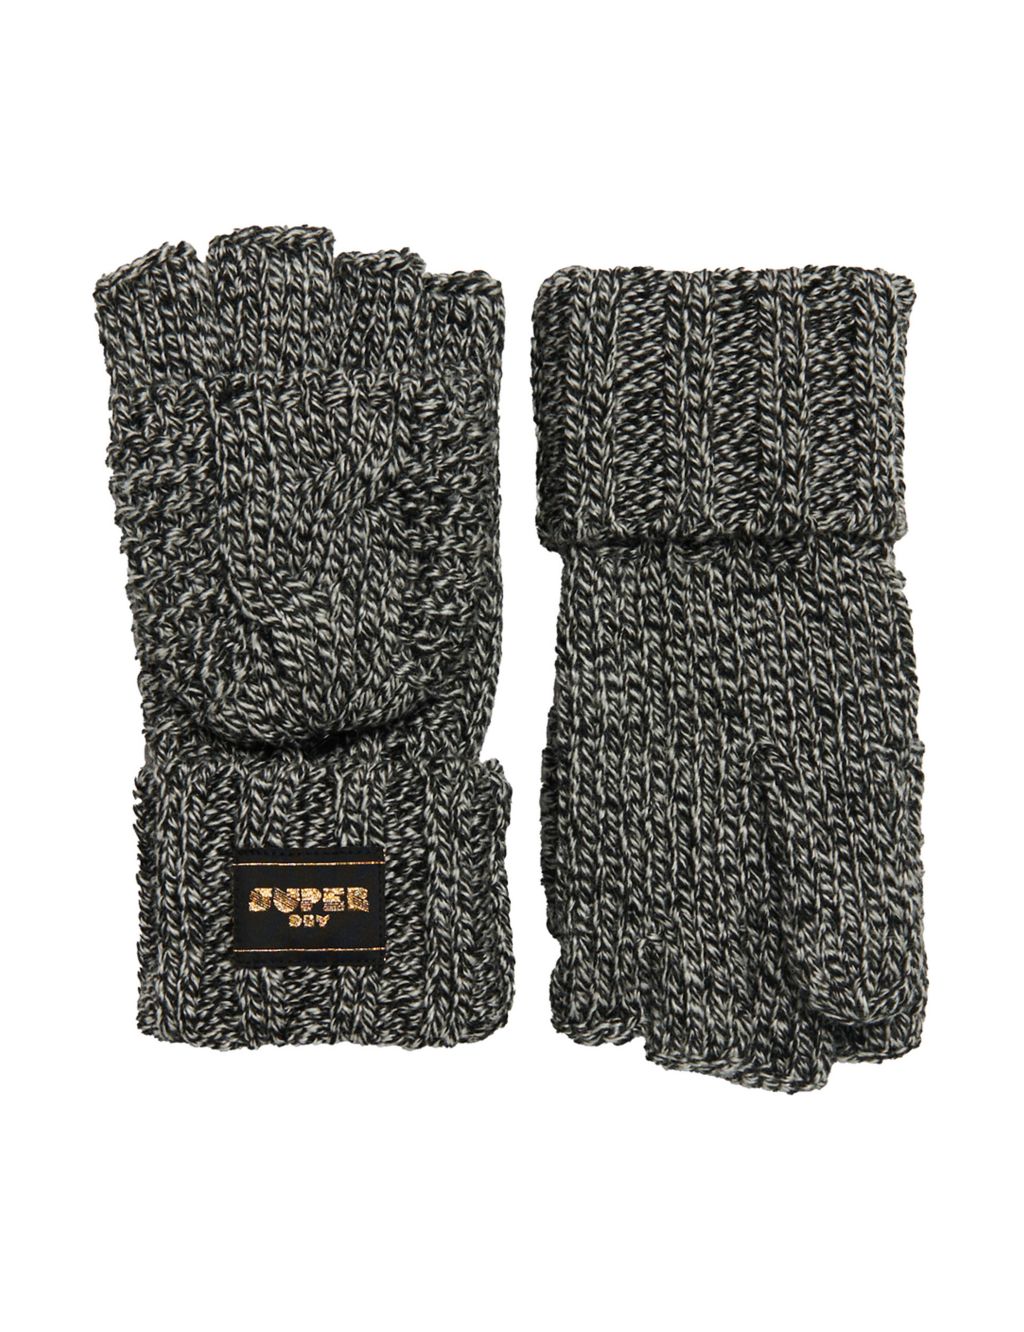 Knitted Cable Gloves with Wool image 4